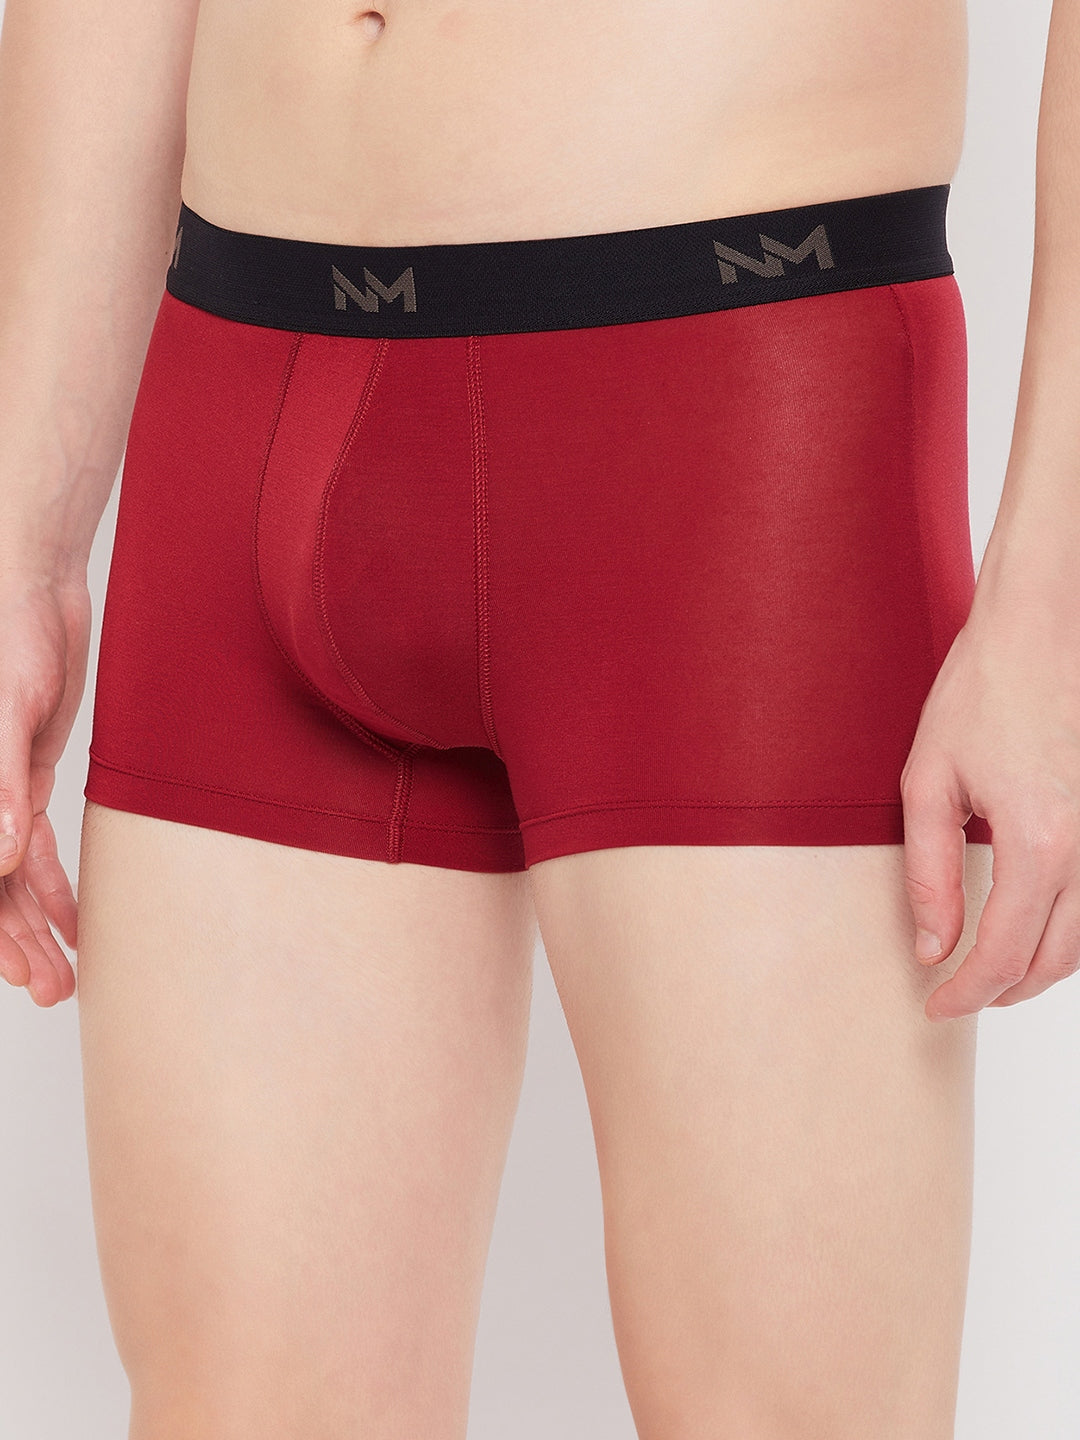 Neva Modal Ultra Solid Short Trunk/Underwear for Men- Blue, Maroon, Steel Grey Collection (Pack of 3)